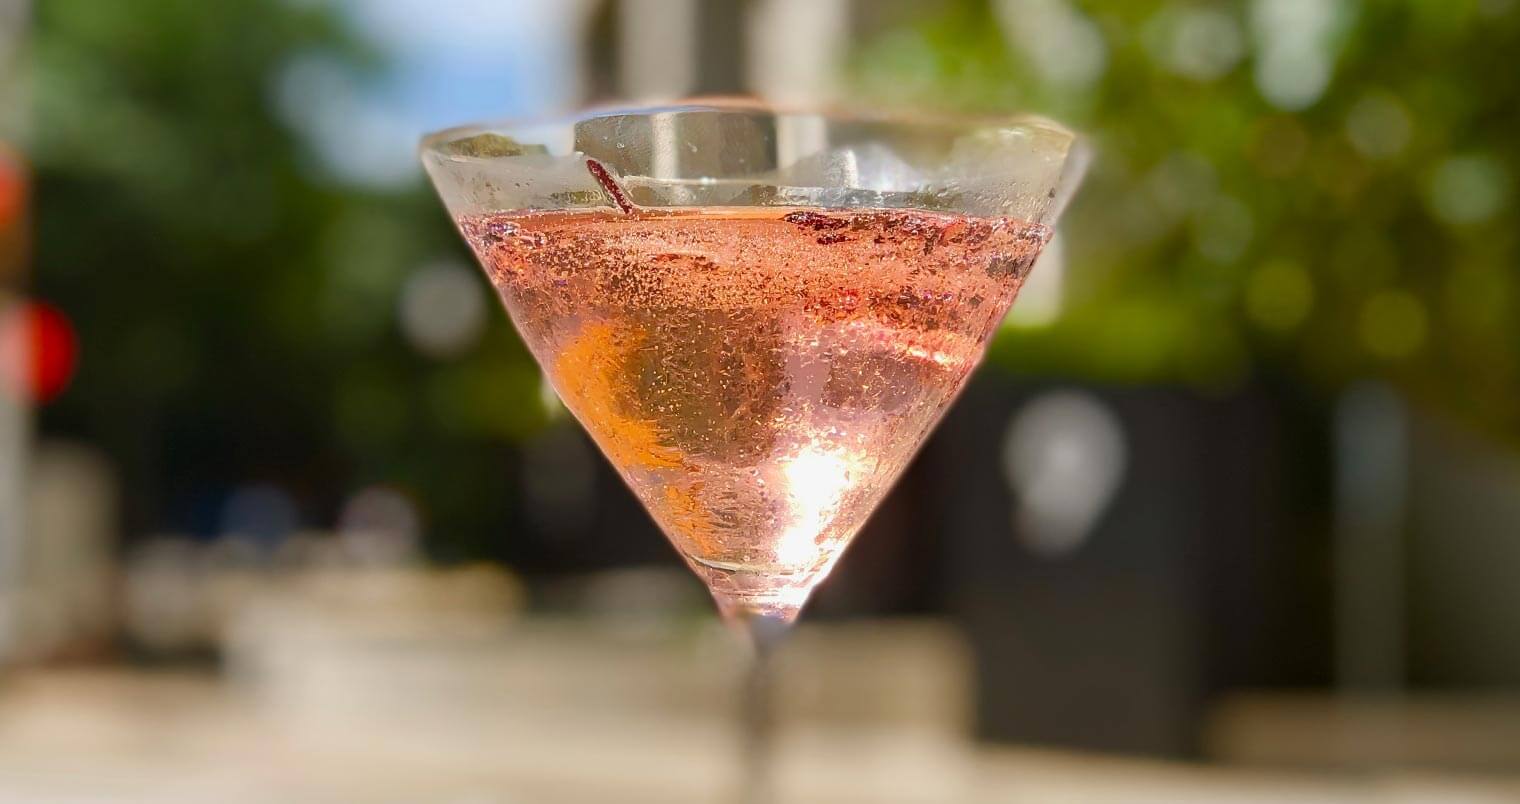 Crazy Beautiful martini cocktail, featured image